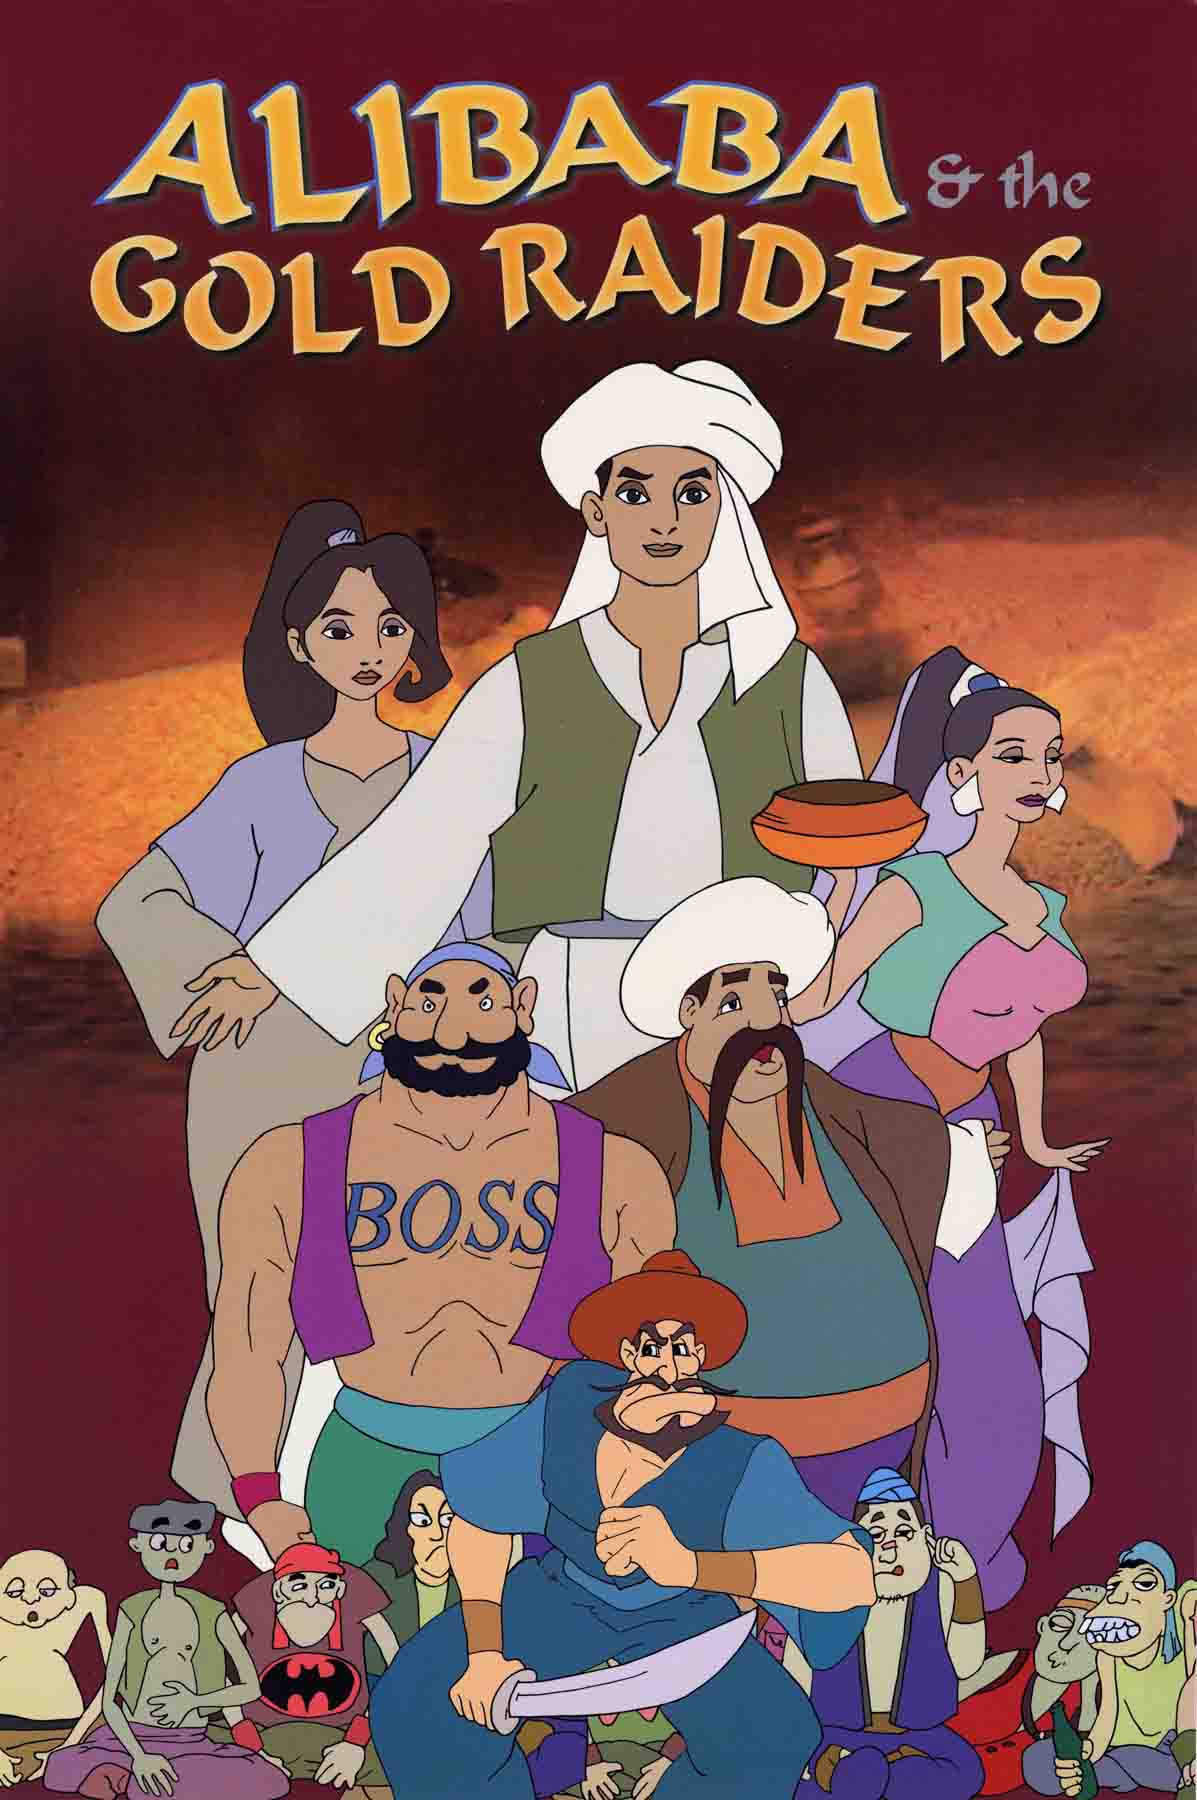 ali babar and the gold raiders-no text